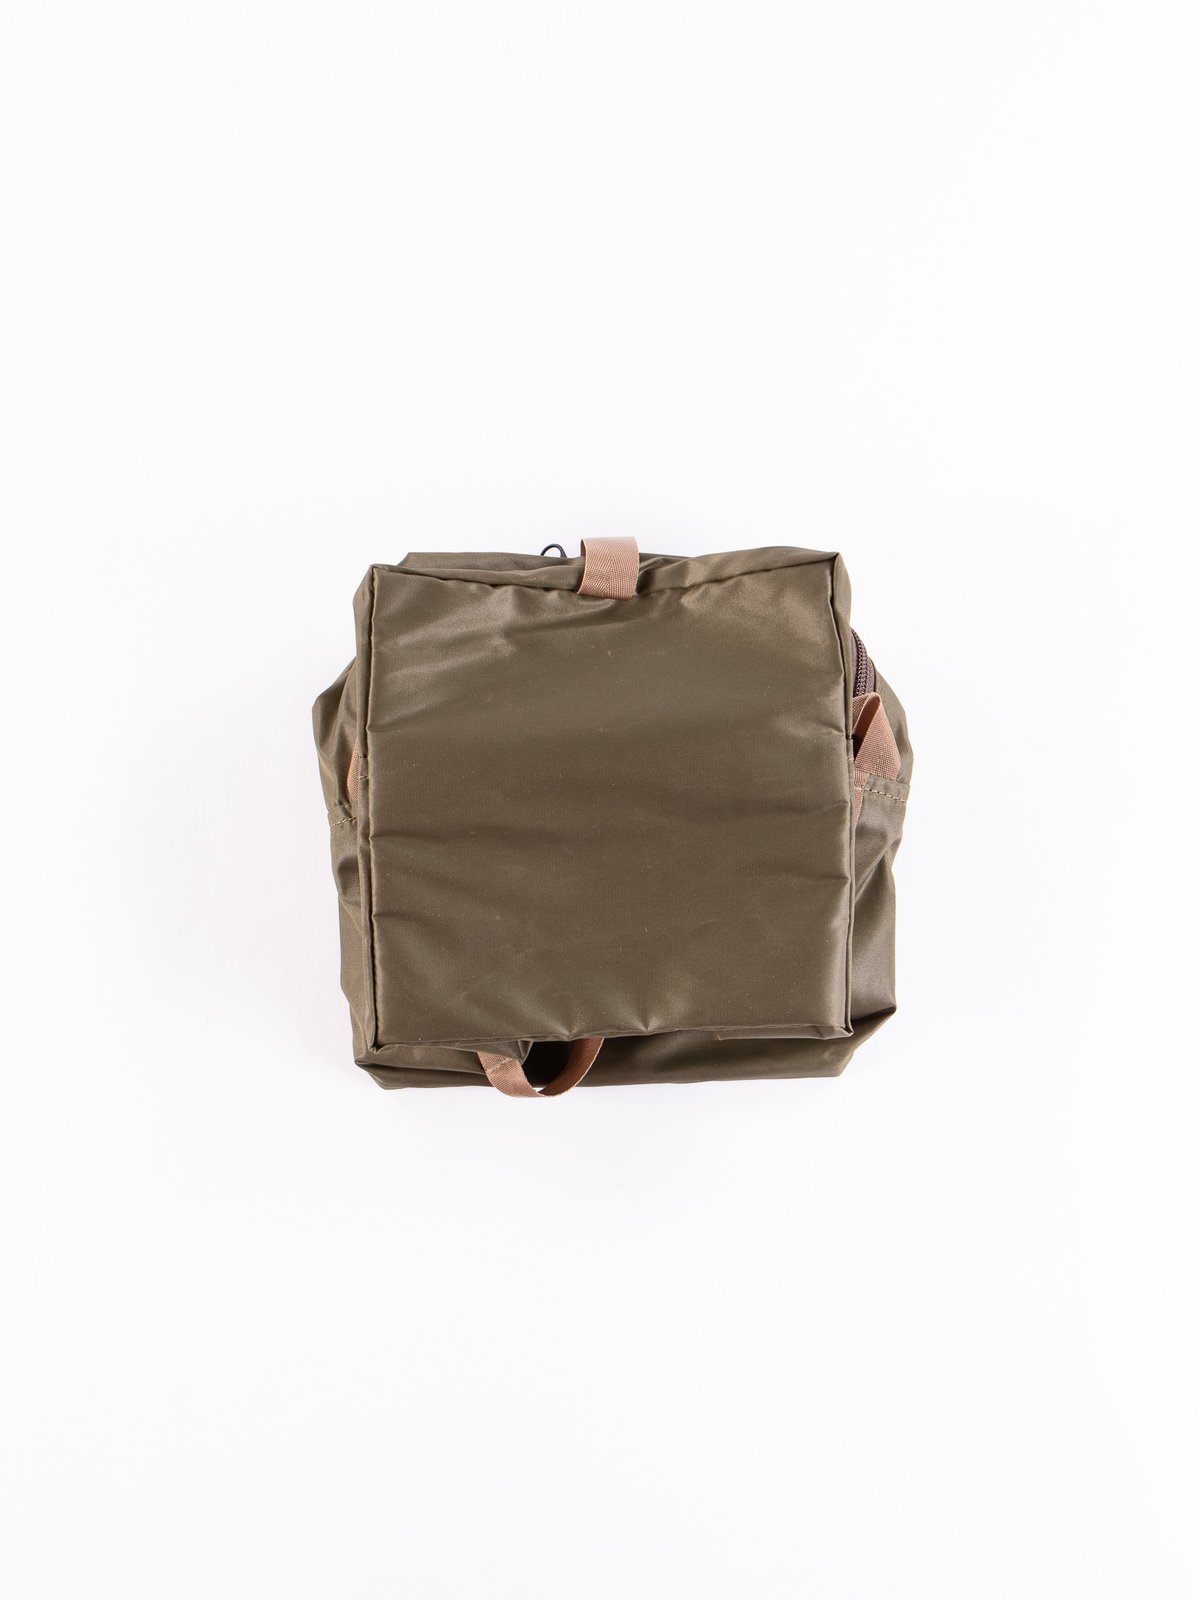 Olive Drab Snack Pack 09807 Pouch Small - Image 3